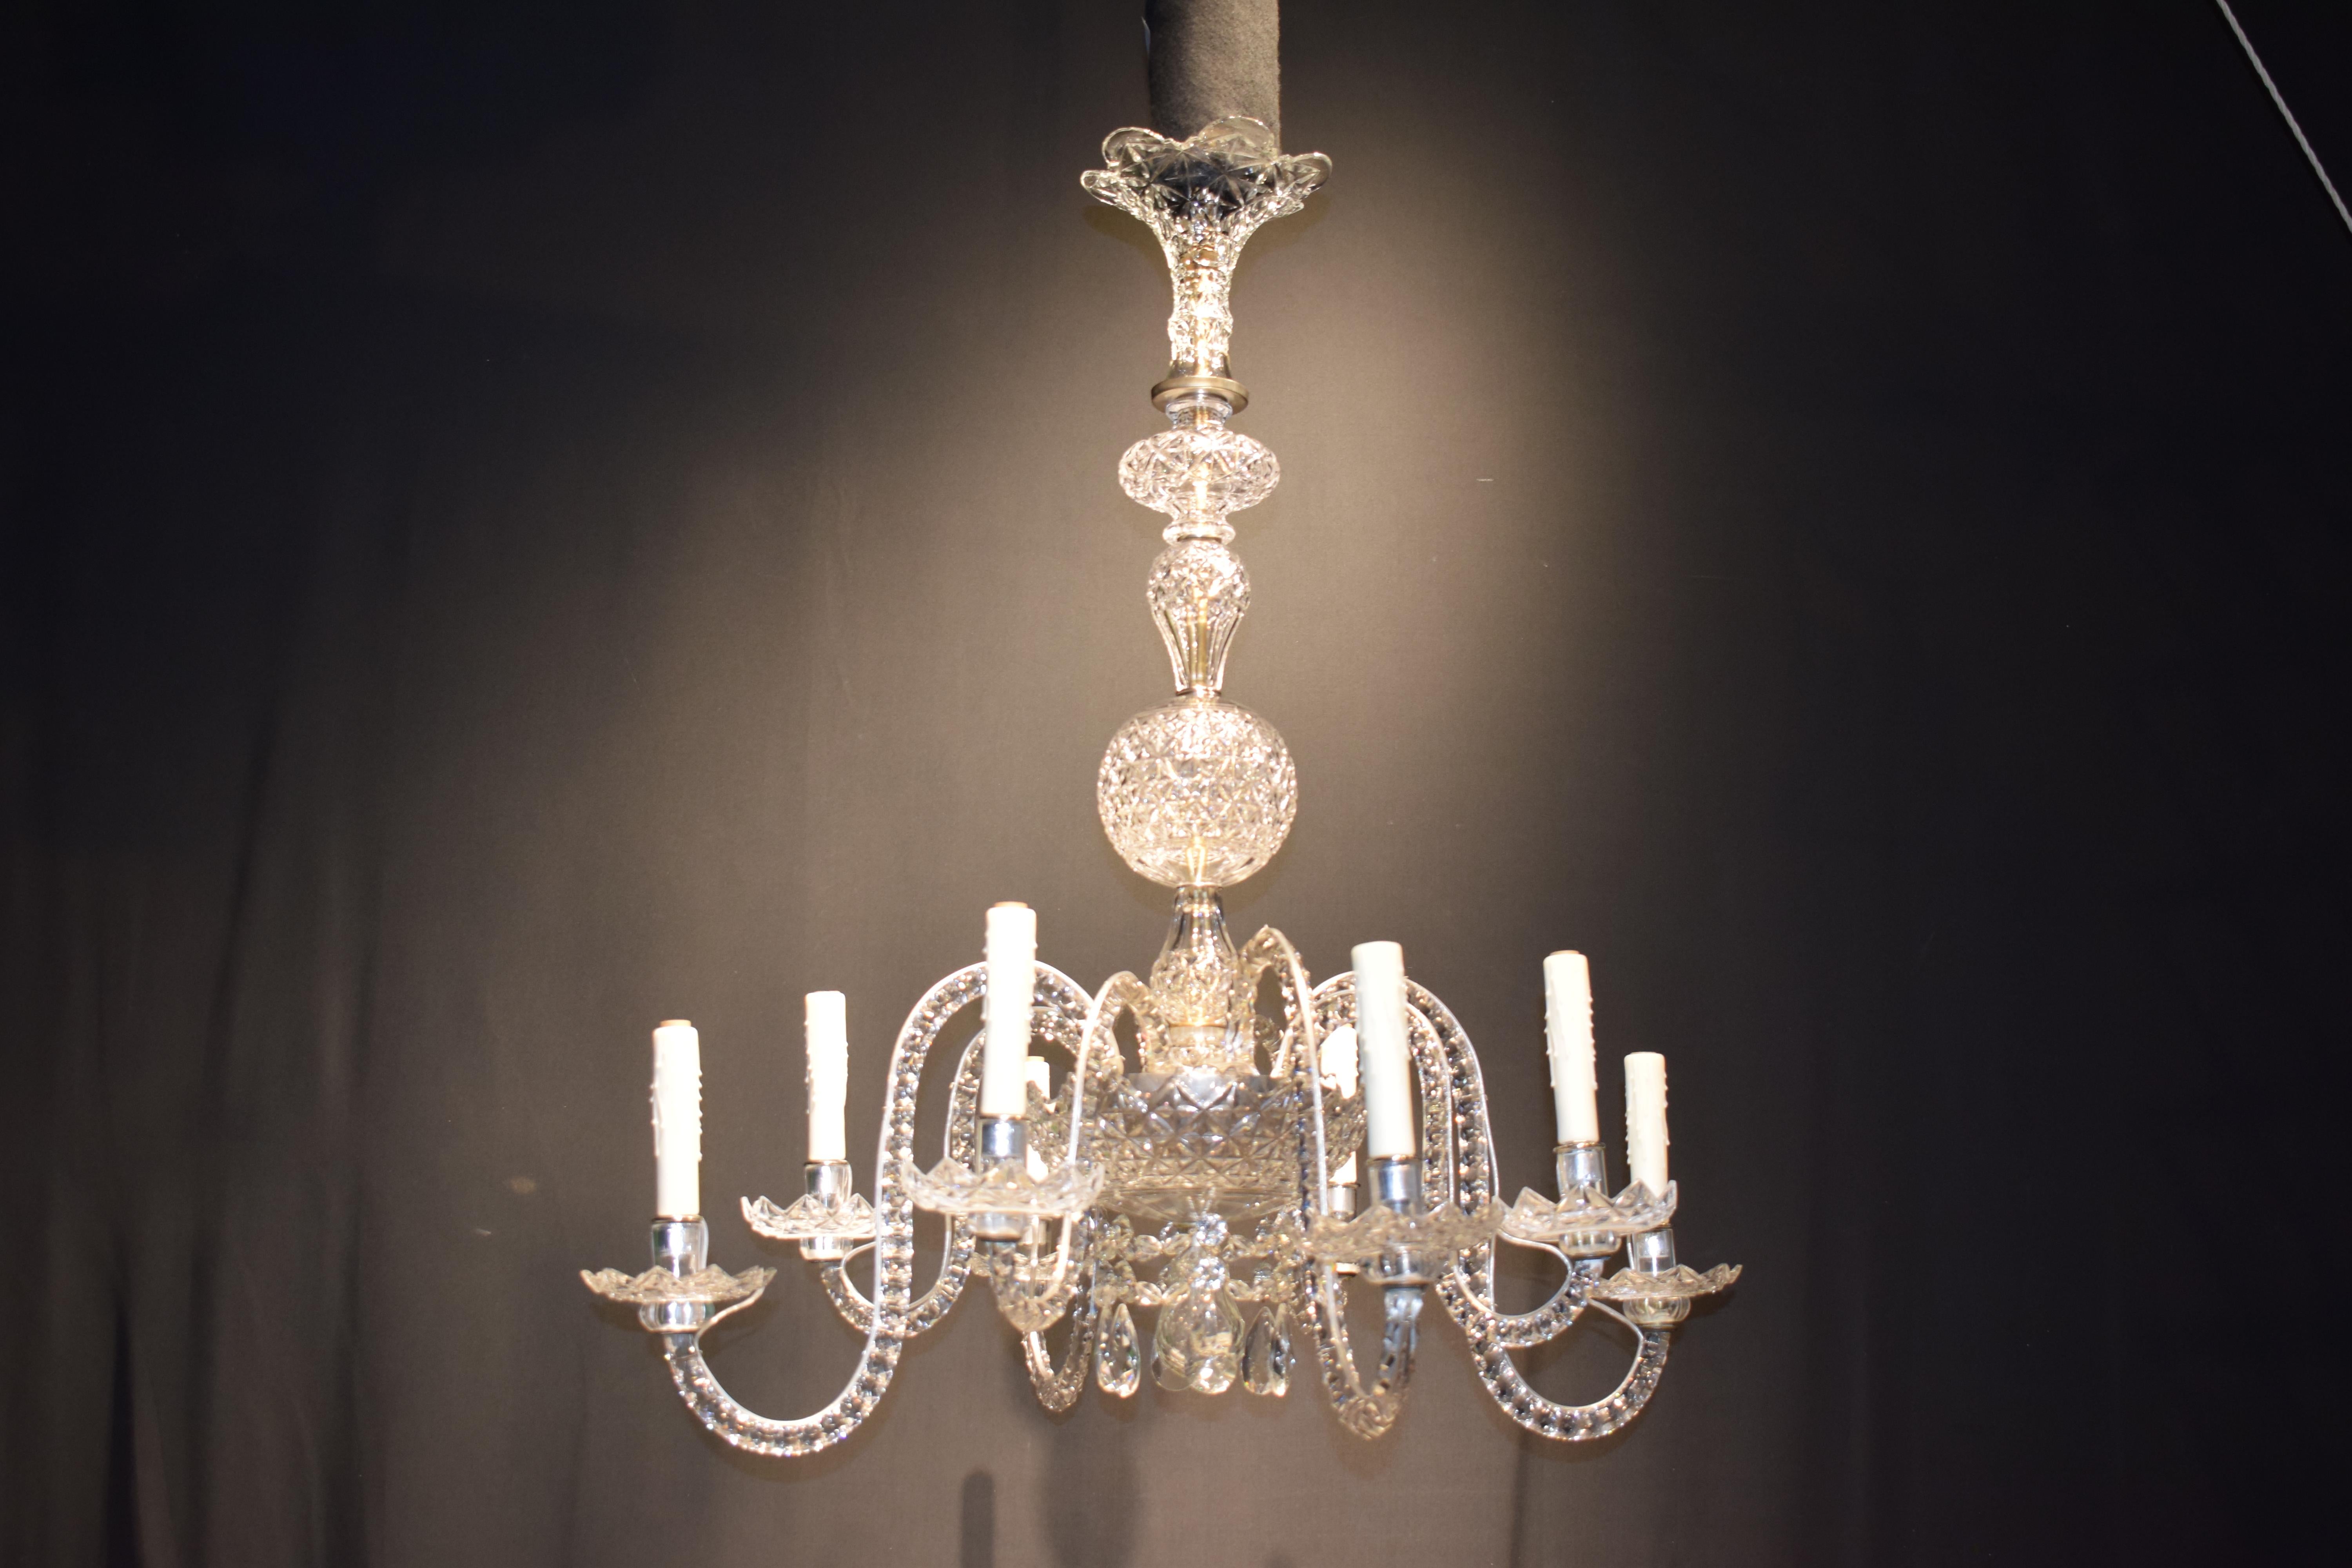 A Very Fine & Elegant Waterford Crystal Chandelier. Circa 1850. Originally for candles, now electrified. England. Anglo Irish. 
Dimensions: Height 37